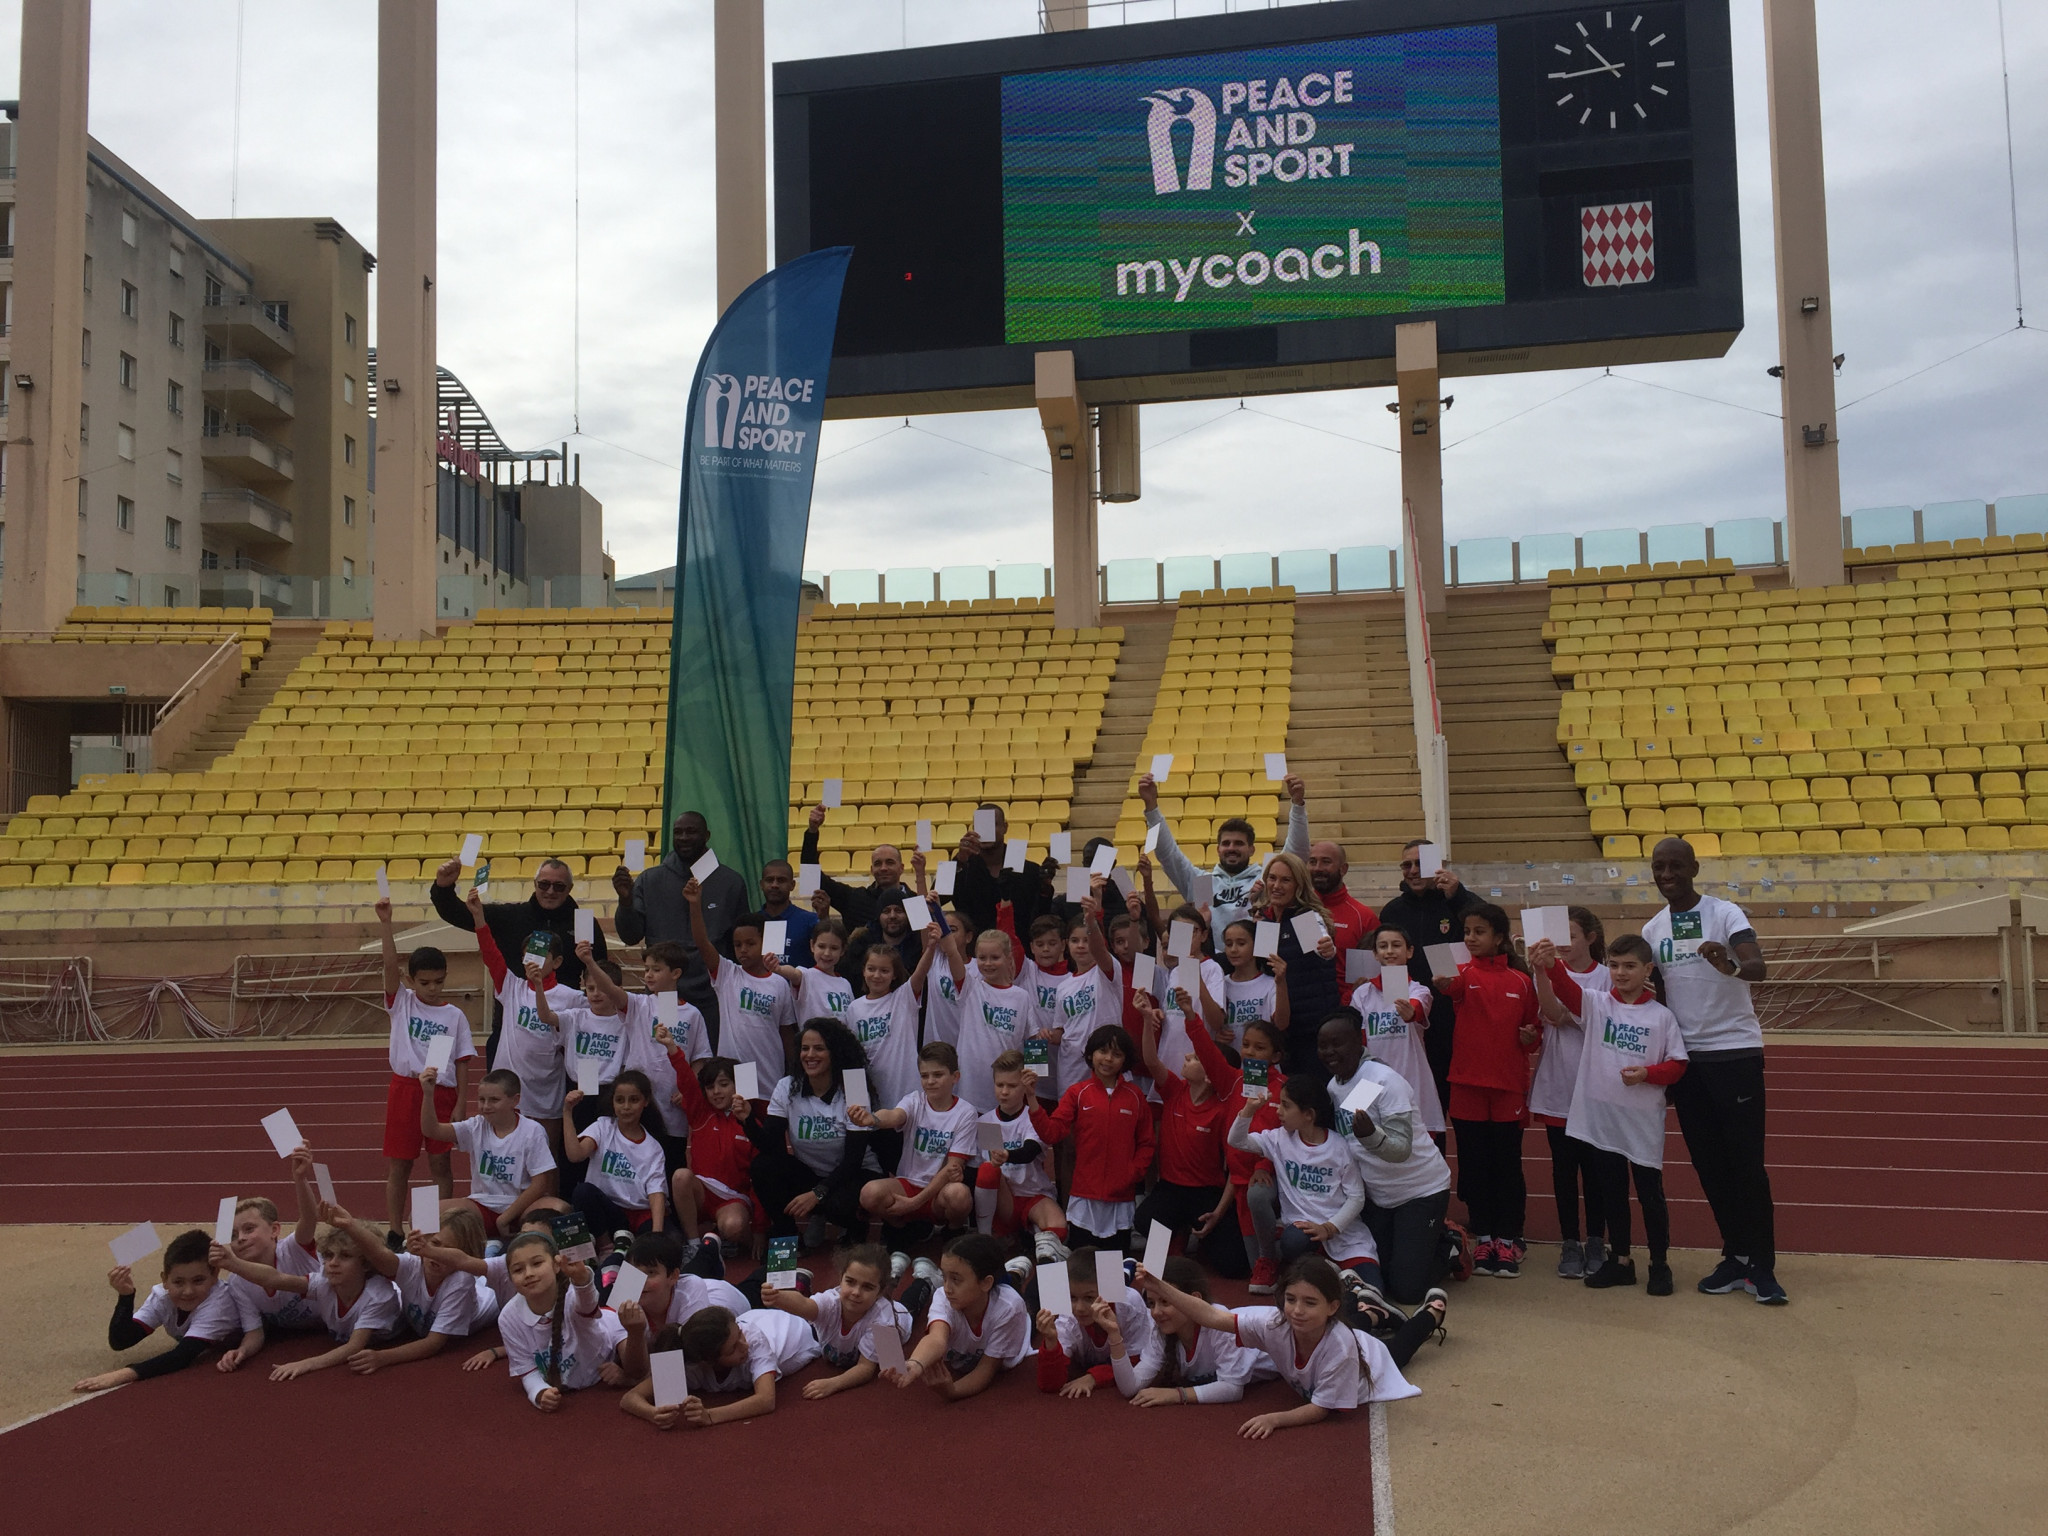 The first day of the Peace and Sport session begun with a coaching session between several Champions of Peace and local schoolchildren at the Stade Louis II in Monte Carlo ©ITG